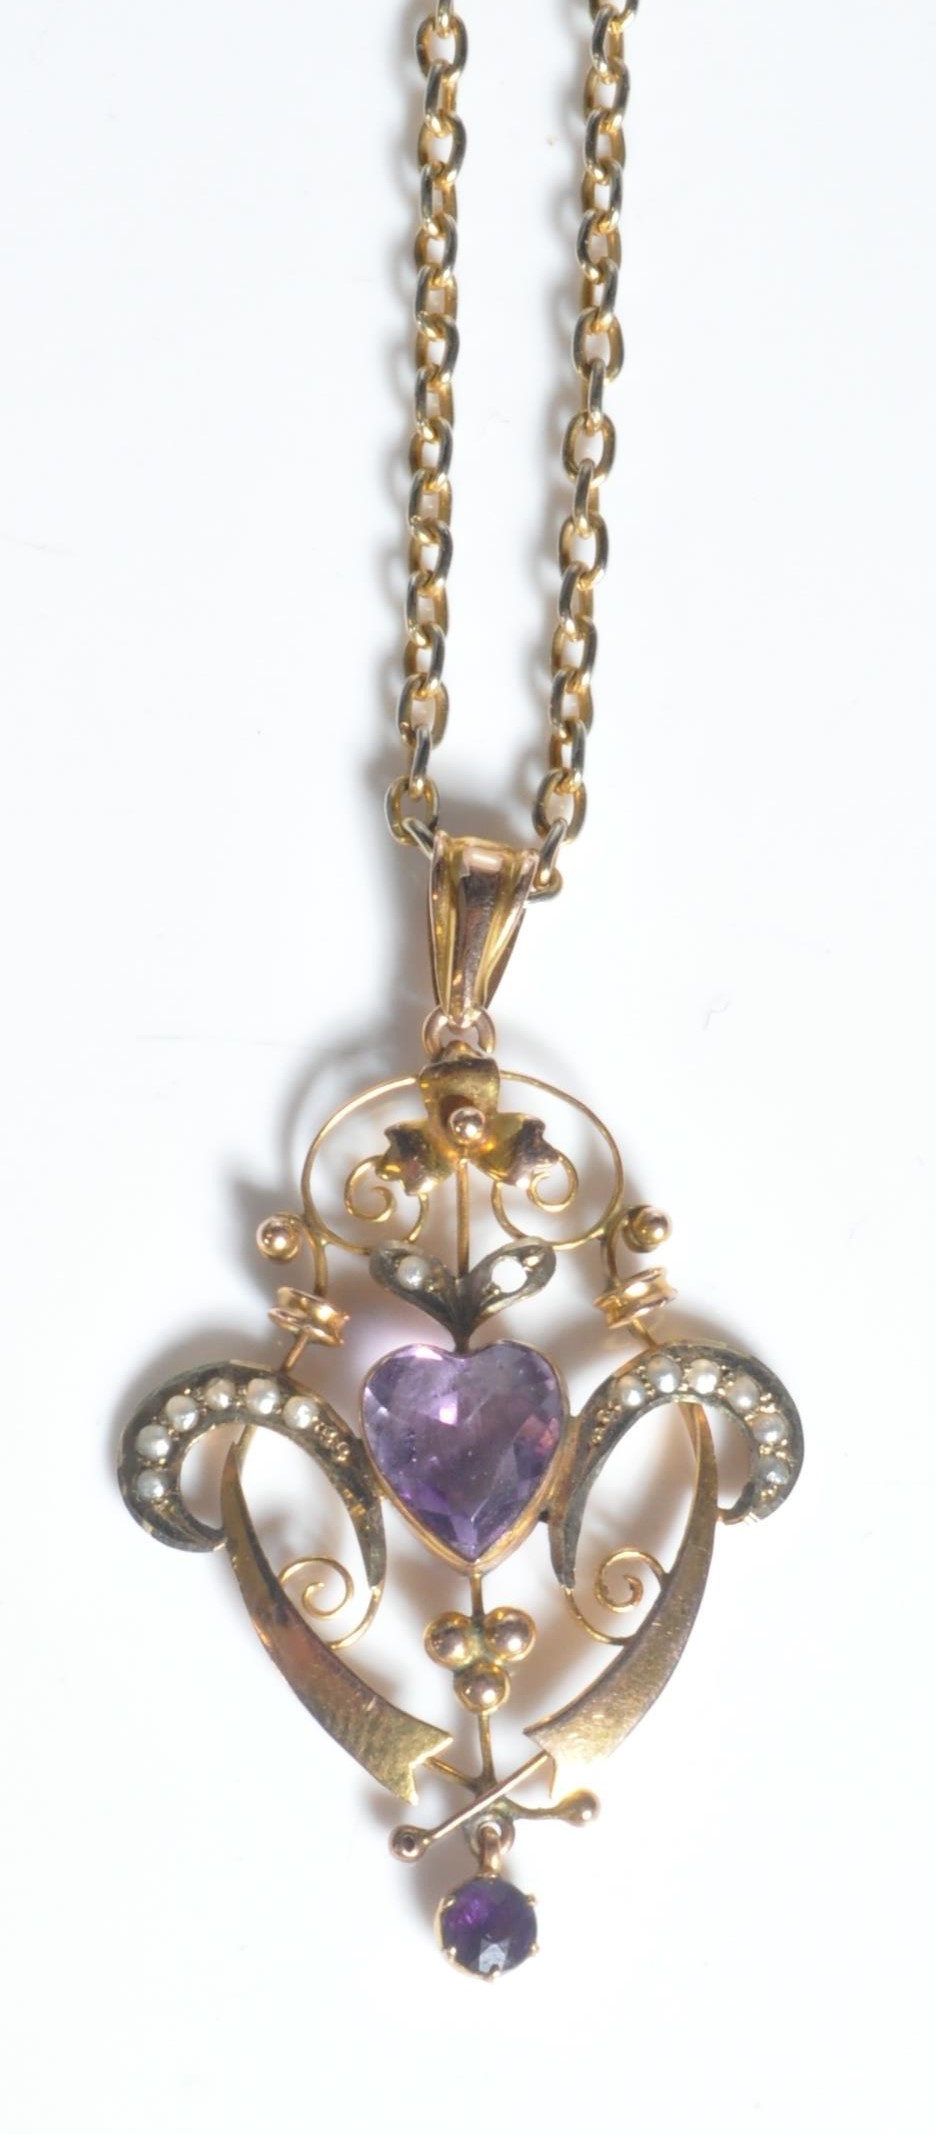 ANTIQUE GOLD PEARL AND AMETHYST PENDANT